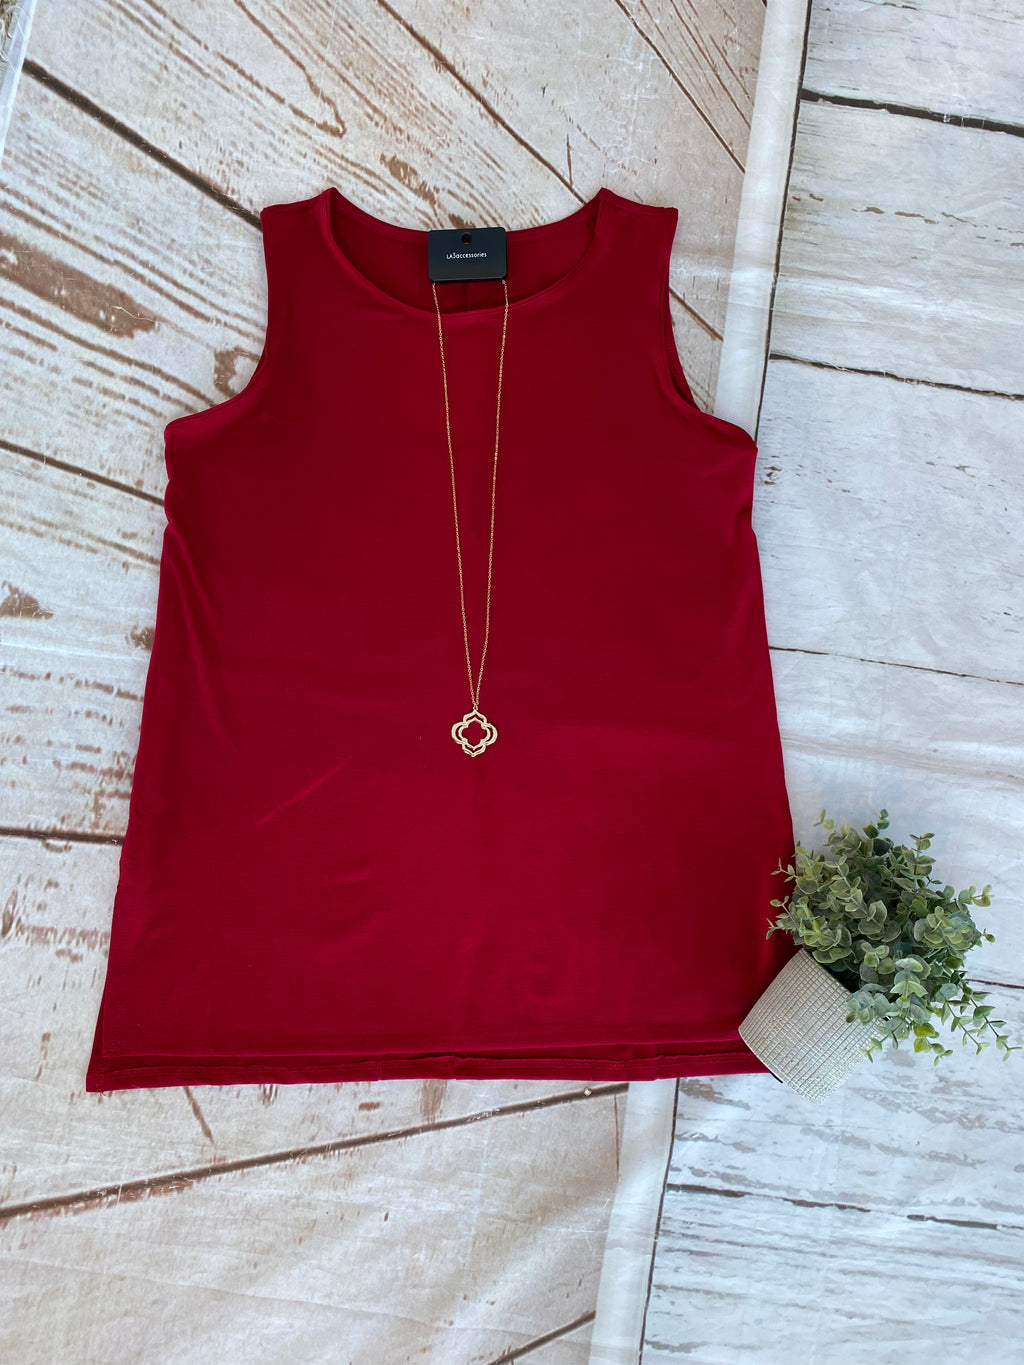 On The Regular Plus Sleeveless Red Top - Catching Fireflies Boutique